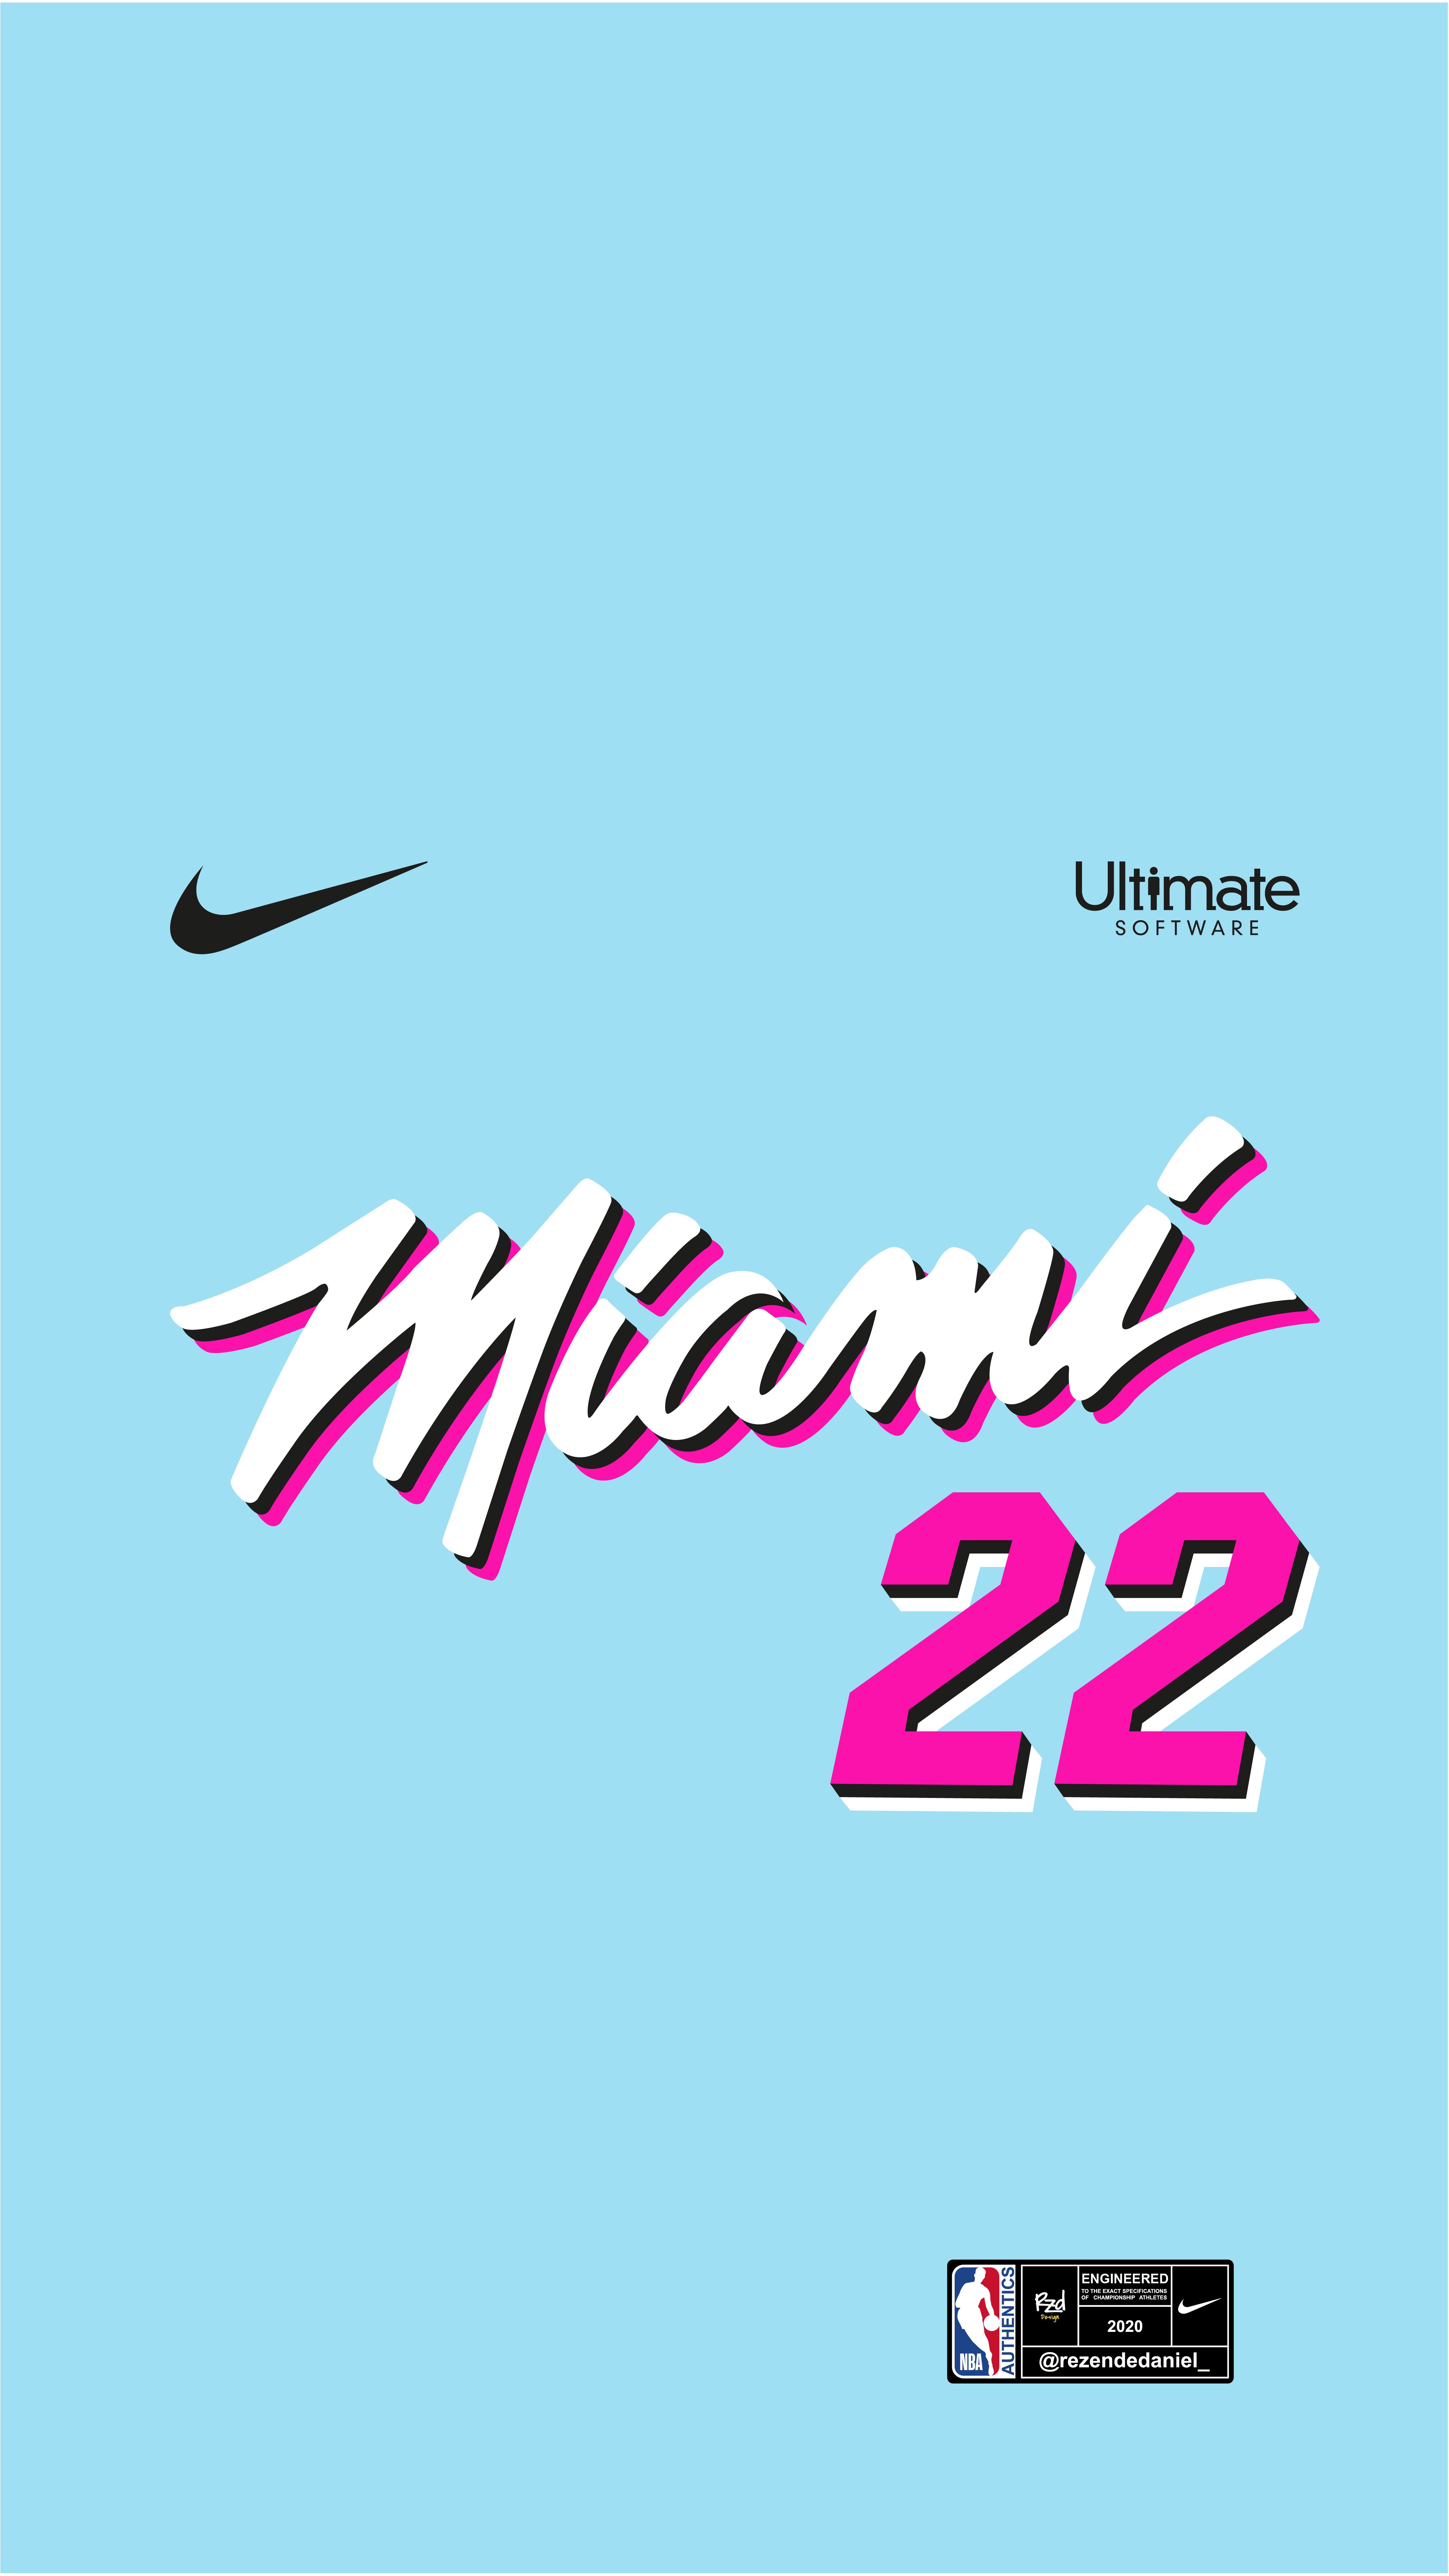 font the miami heat vice jersey